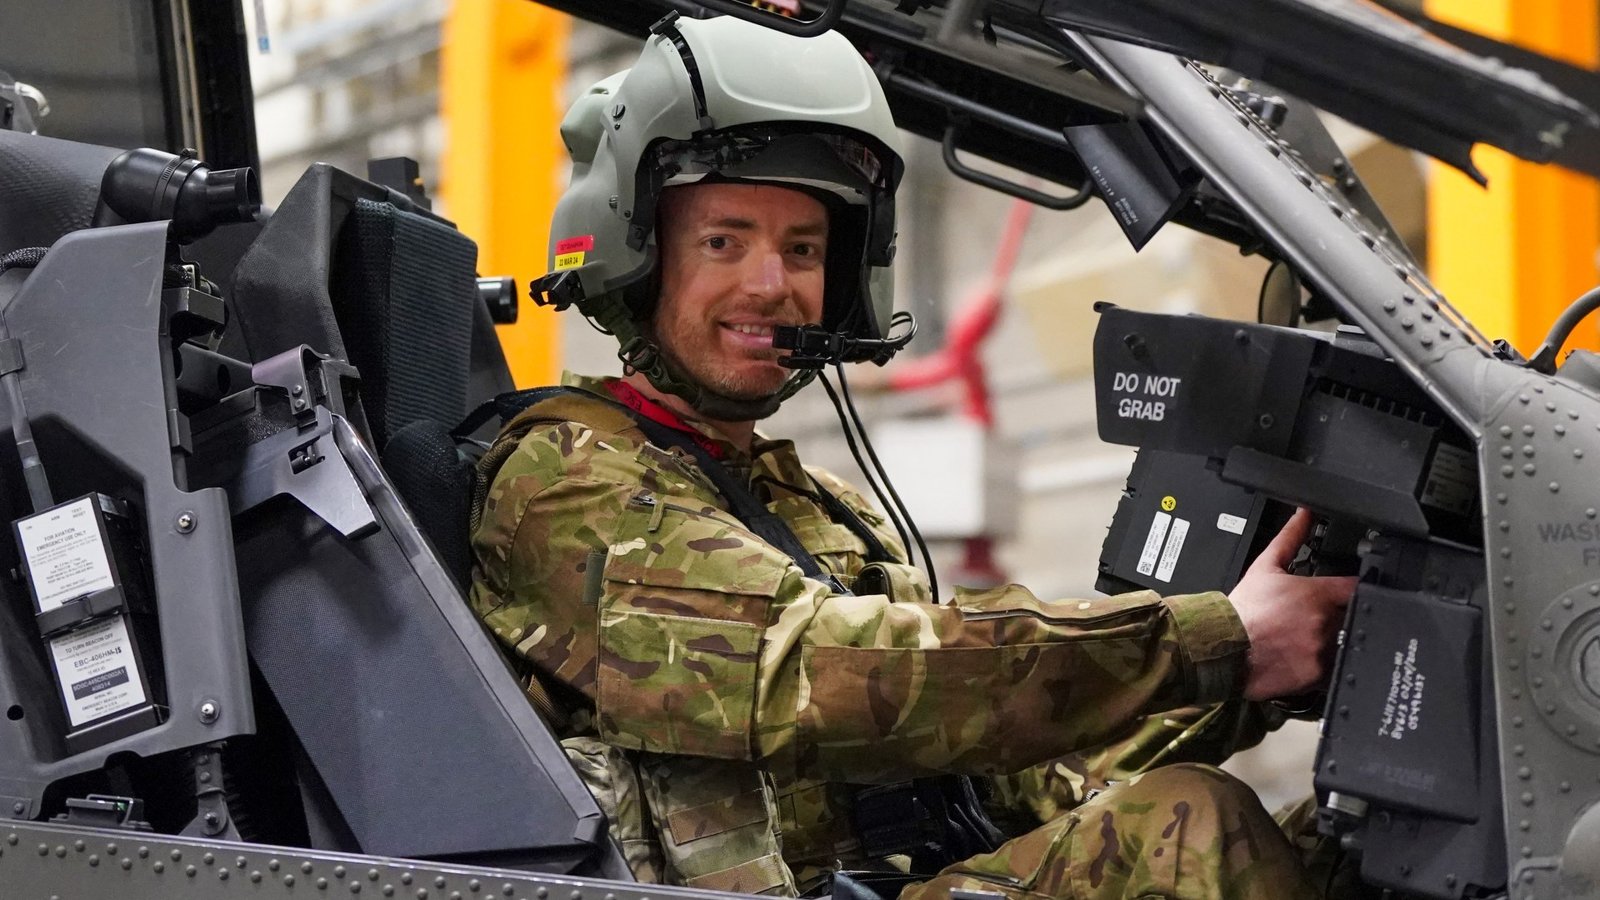 I flew in new Apache chopper – it’s Putin’s worst nightmare, with AI assisted weapons that can attack 75 miles away